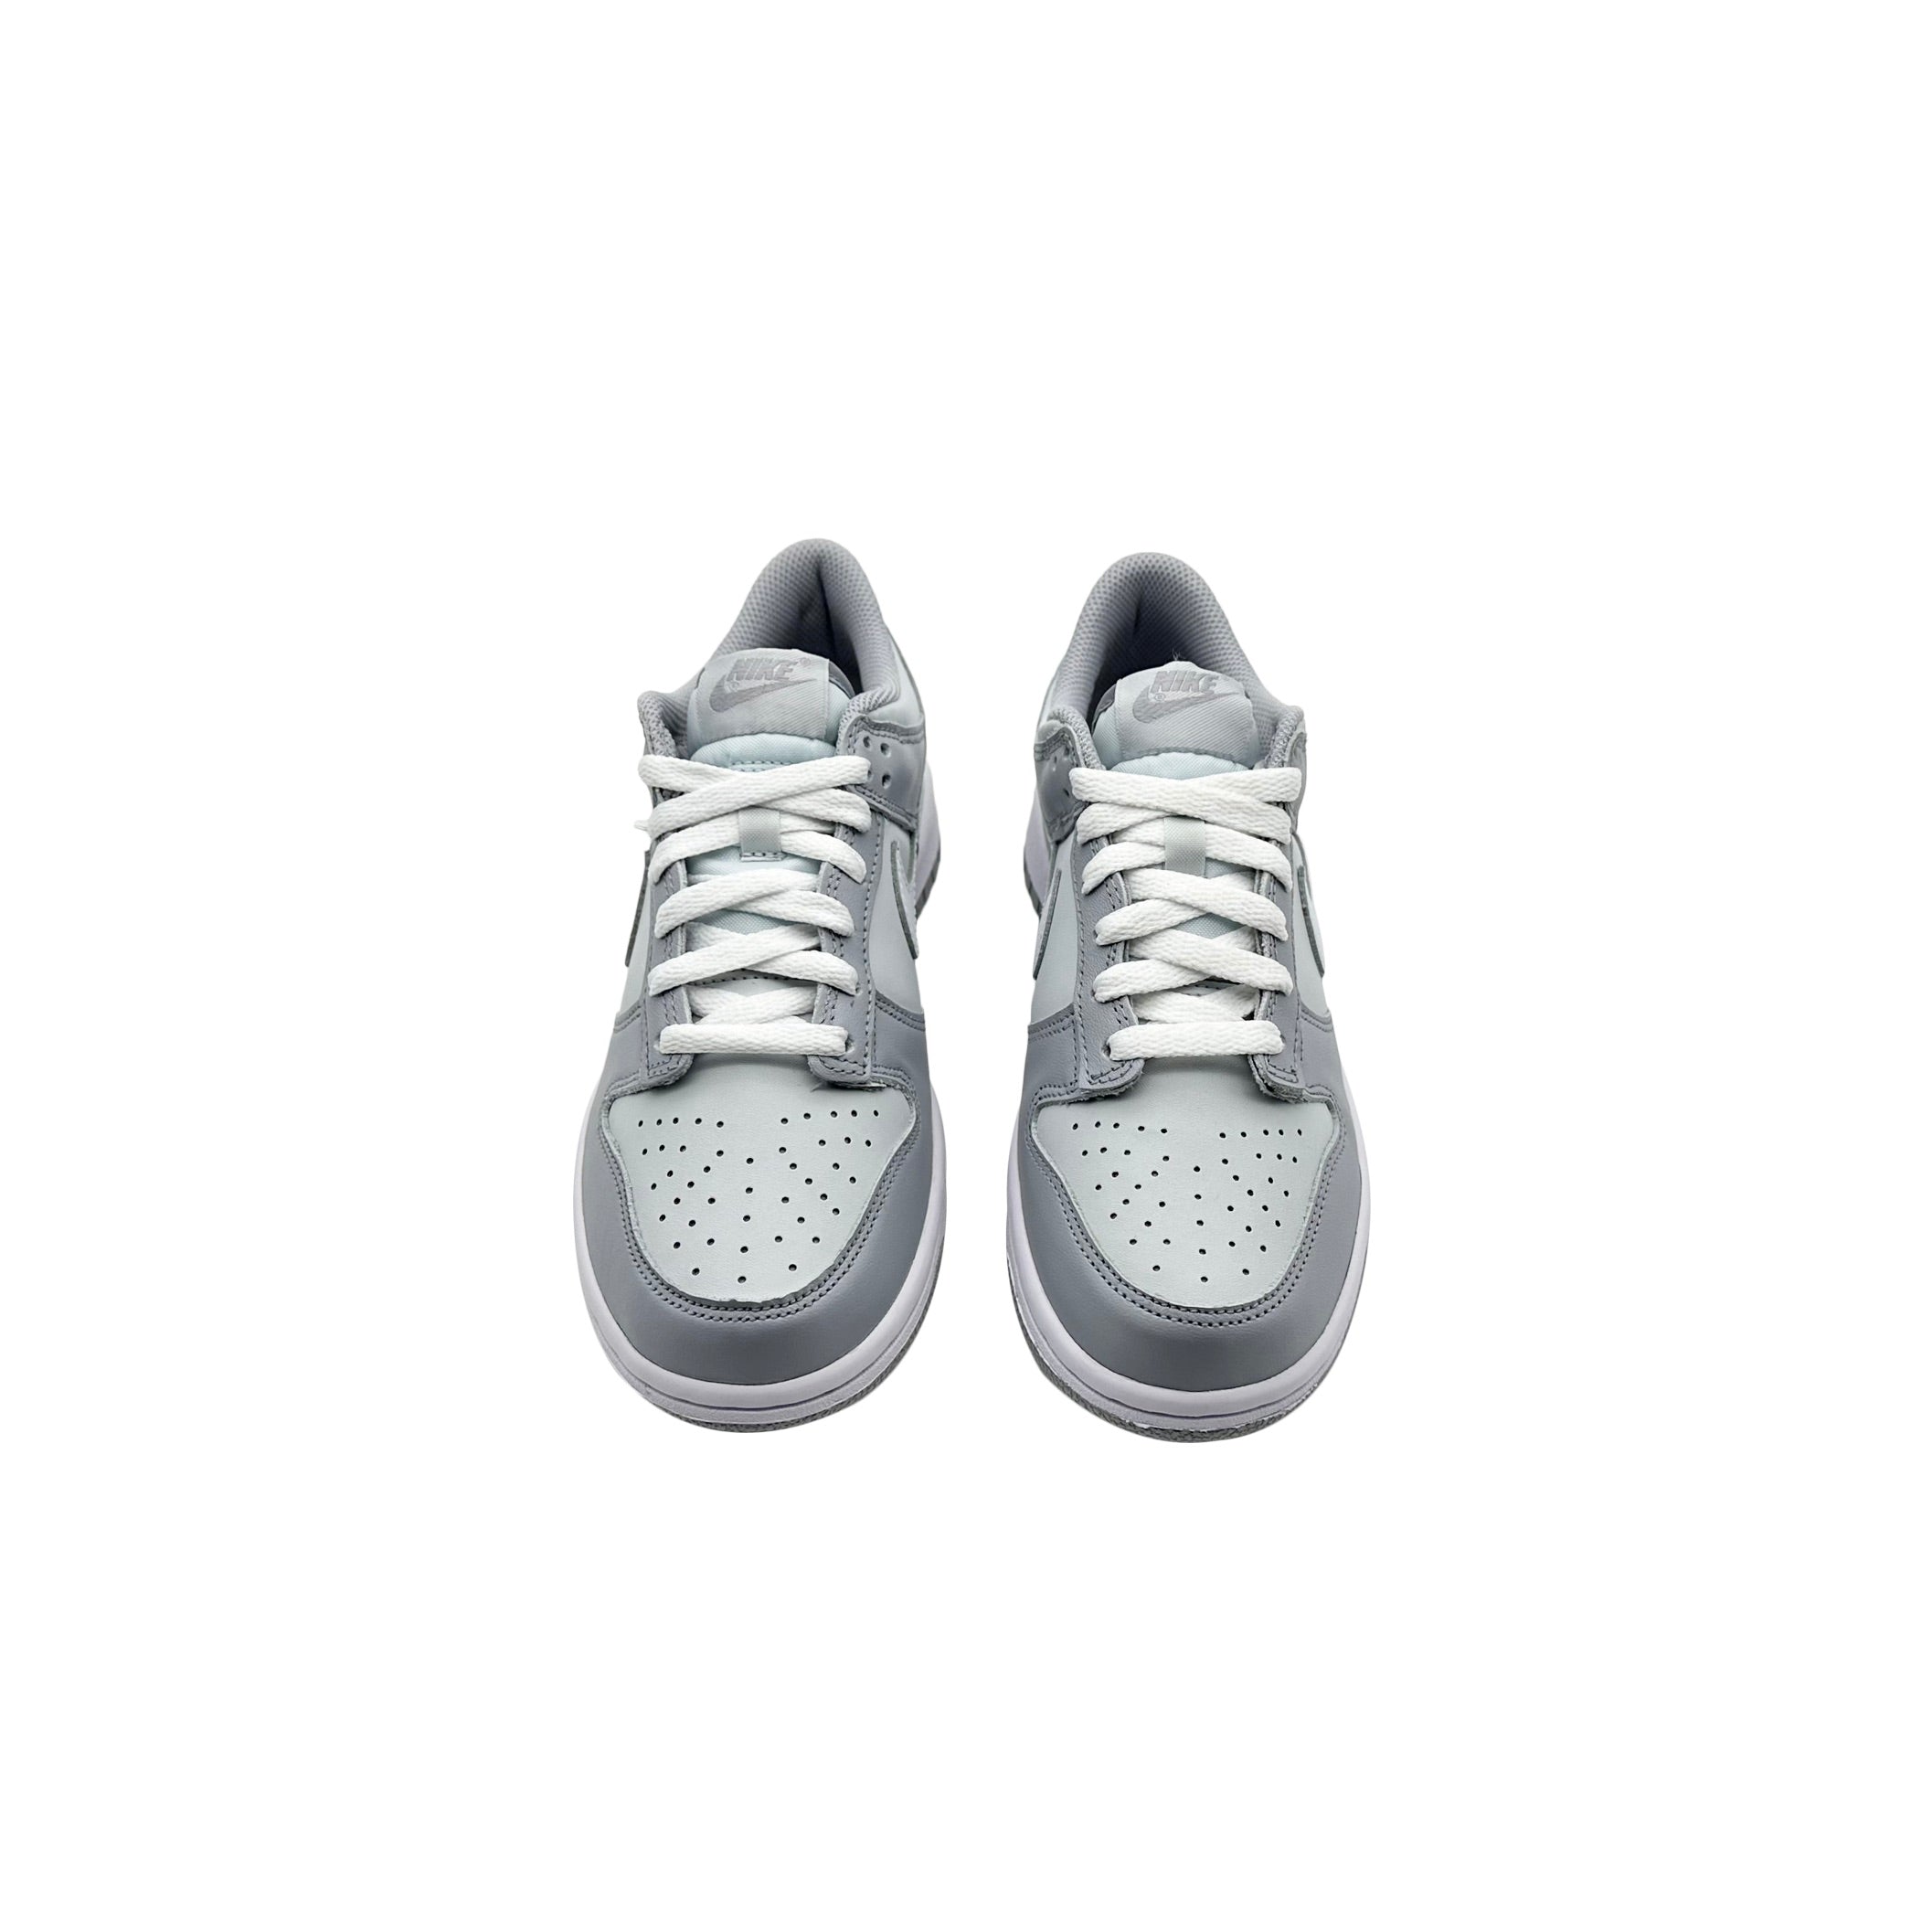 Nike Dunk Low Two Tone Grey GS - DH9765 - 001 - Coziness